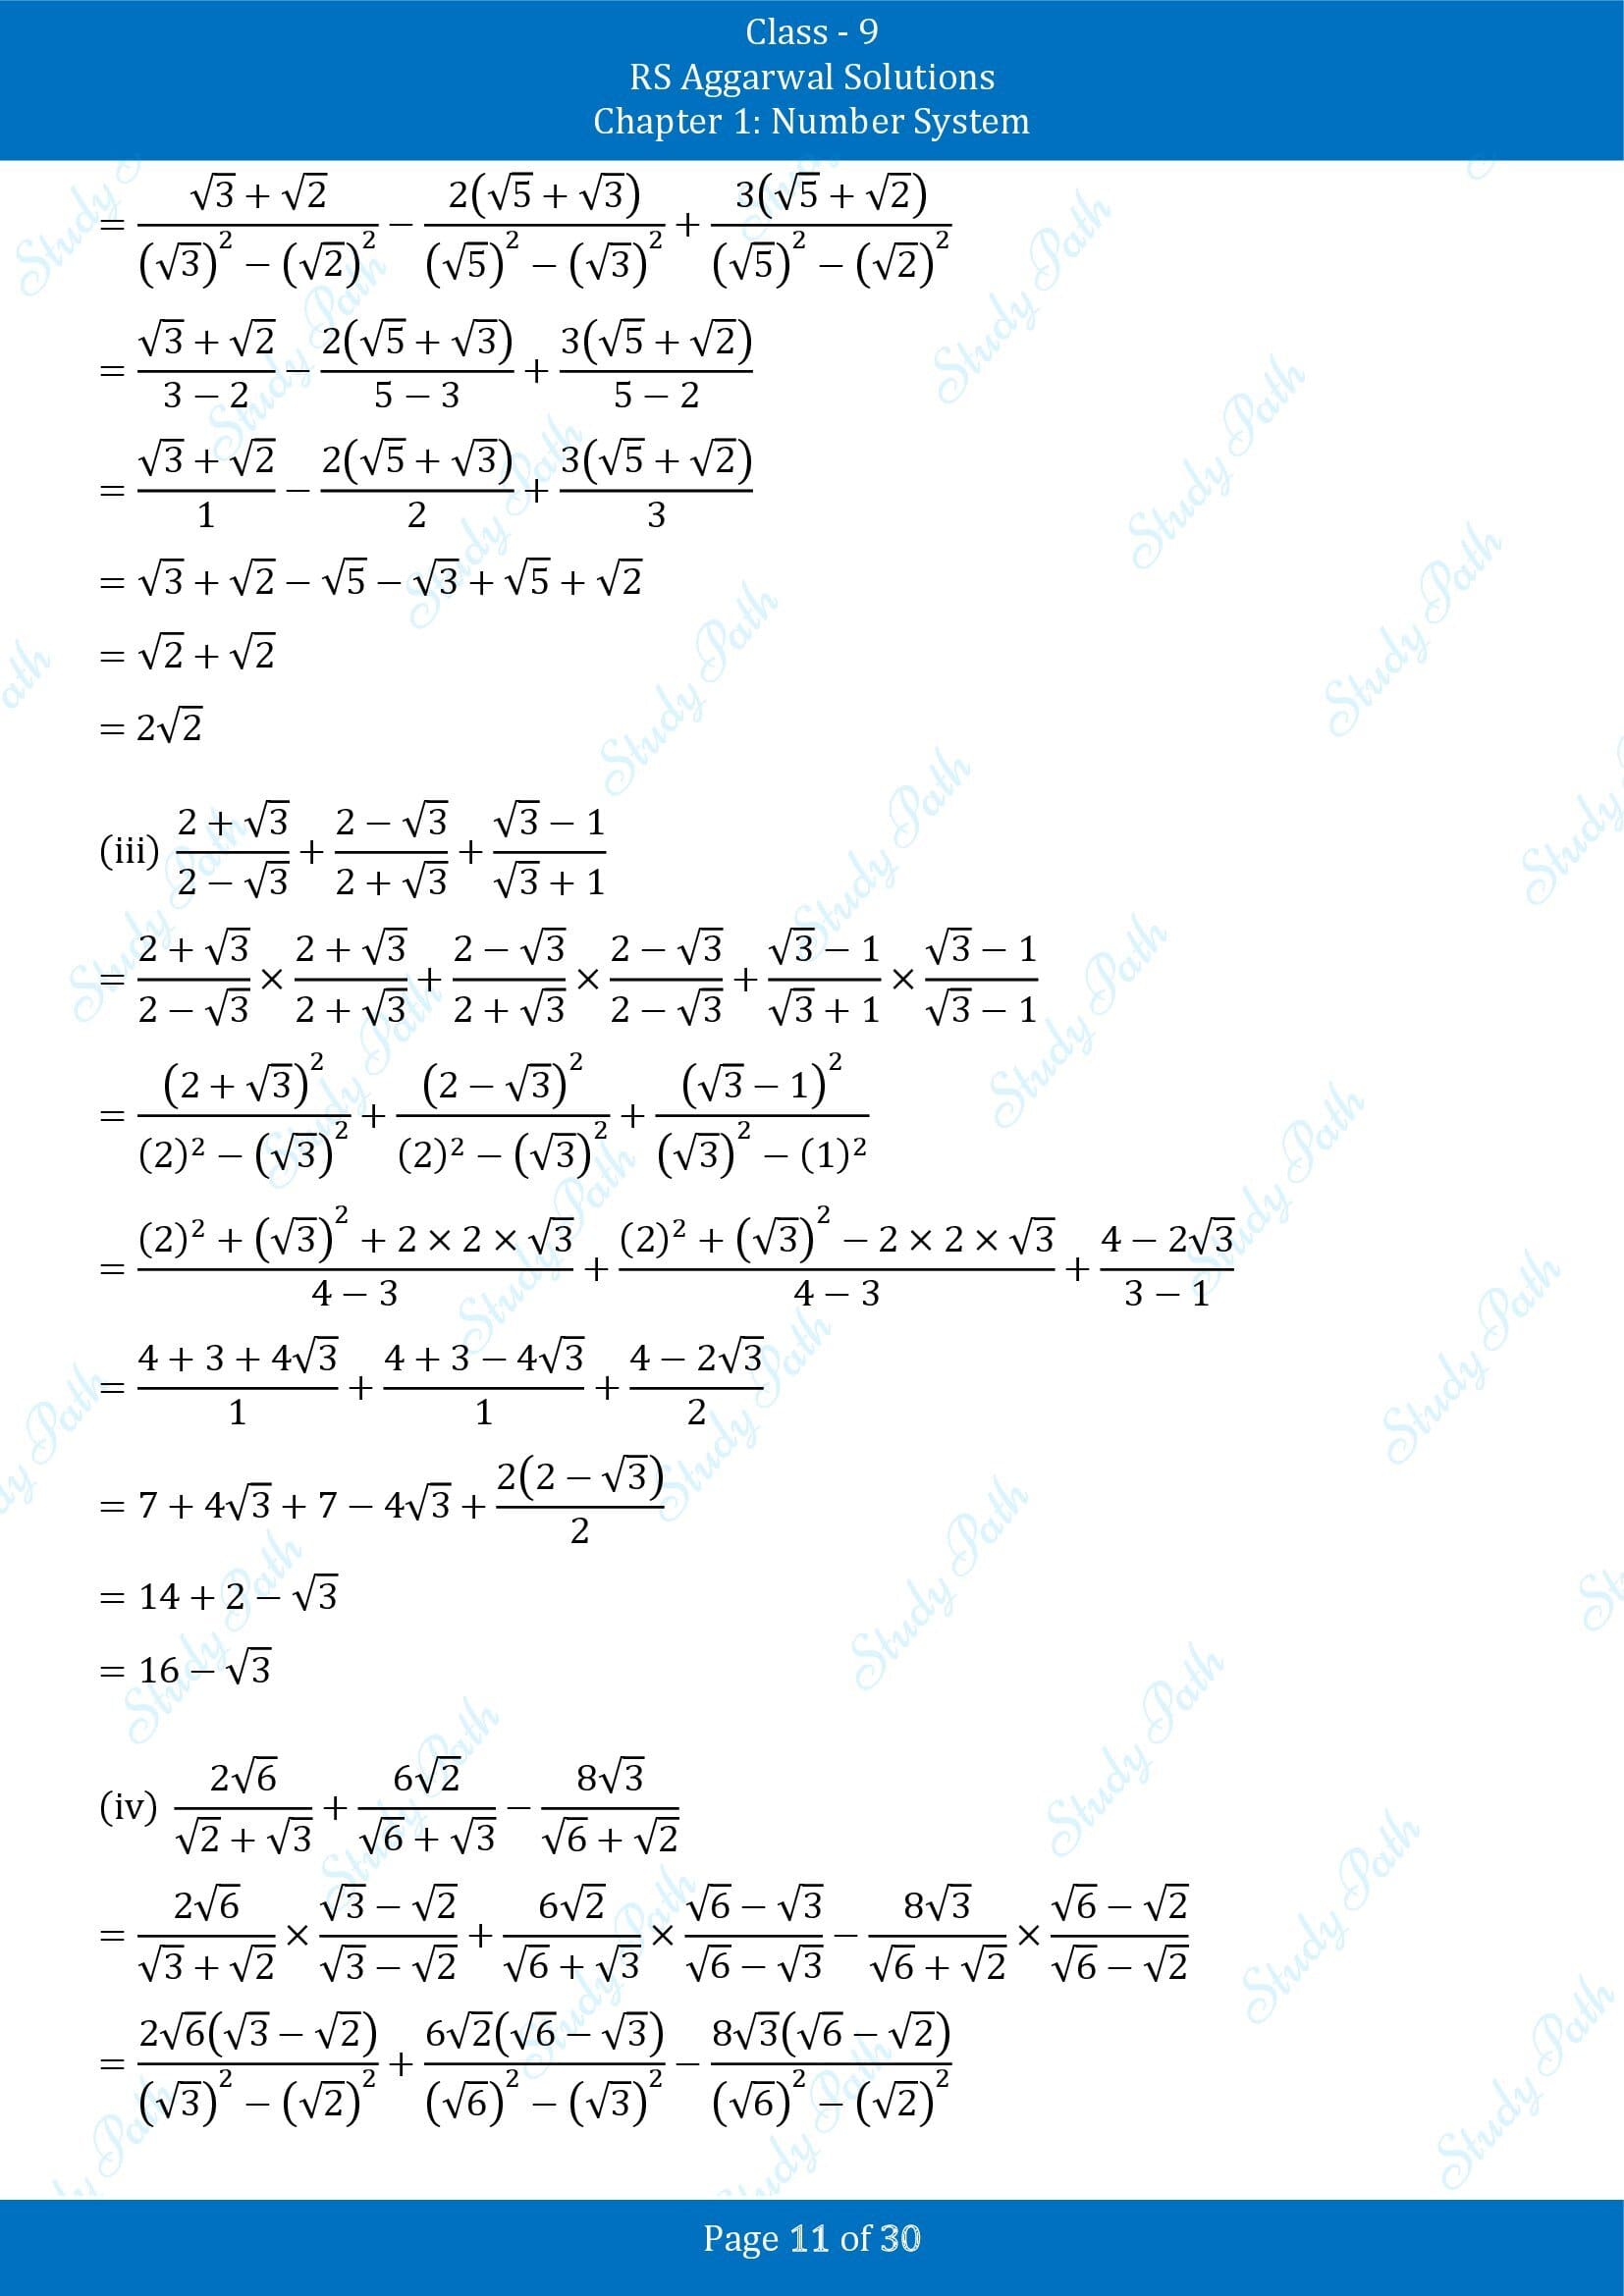 RS Aggarwal Solutions Class 9 Chapter 1 Number System Exercise 1F 00011